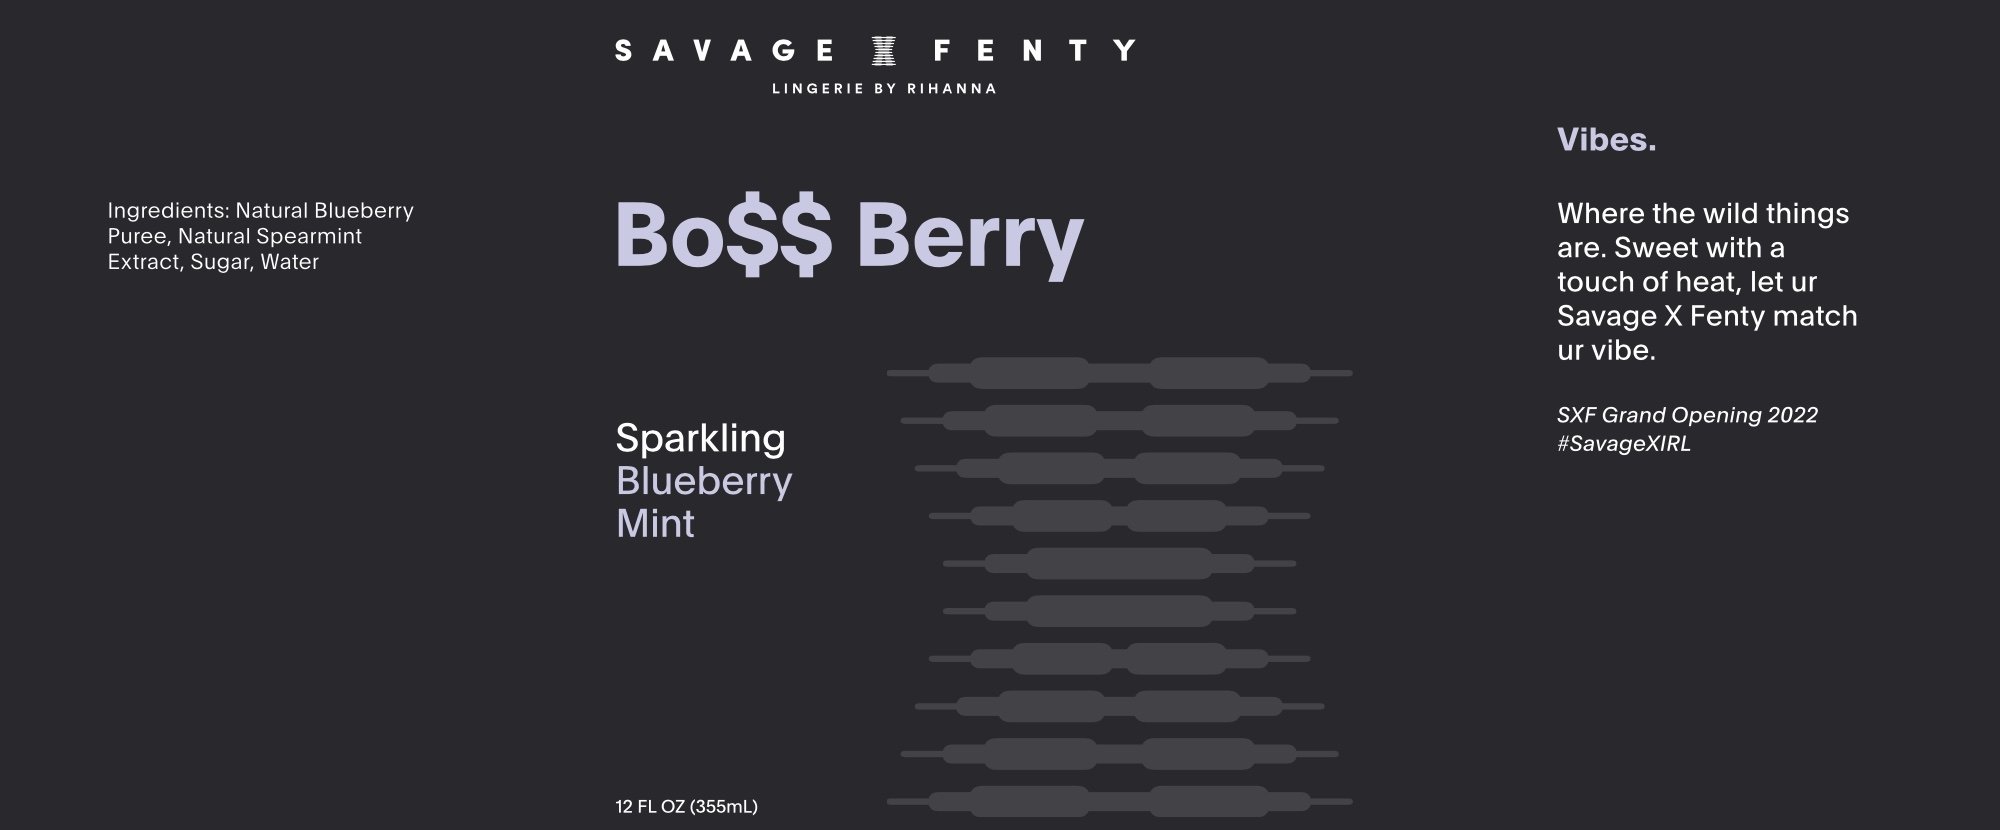 berry seltzer can label.jpg